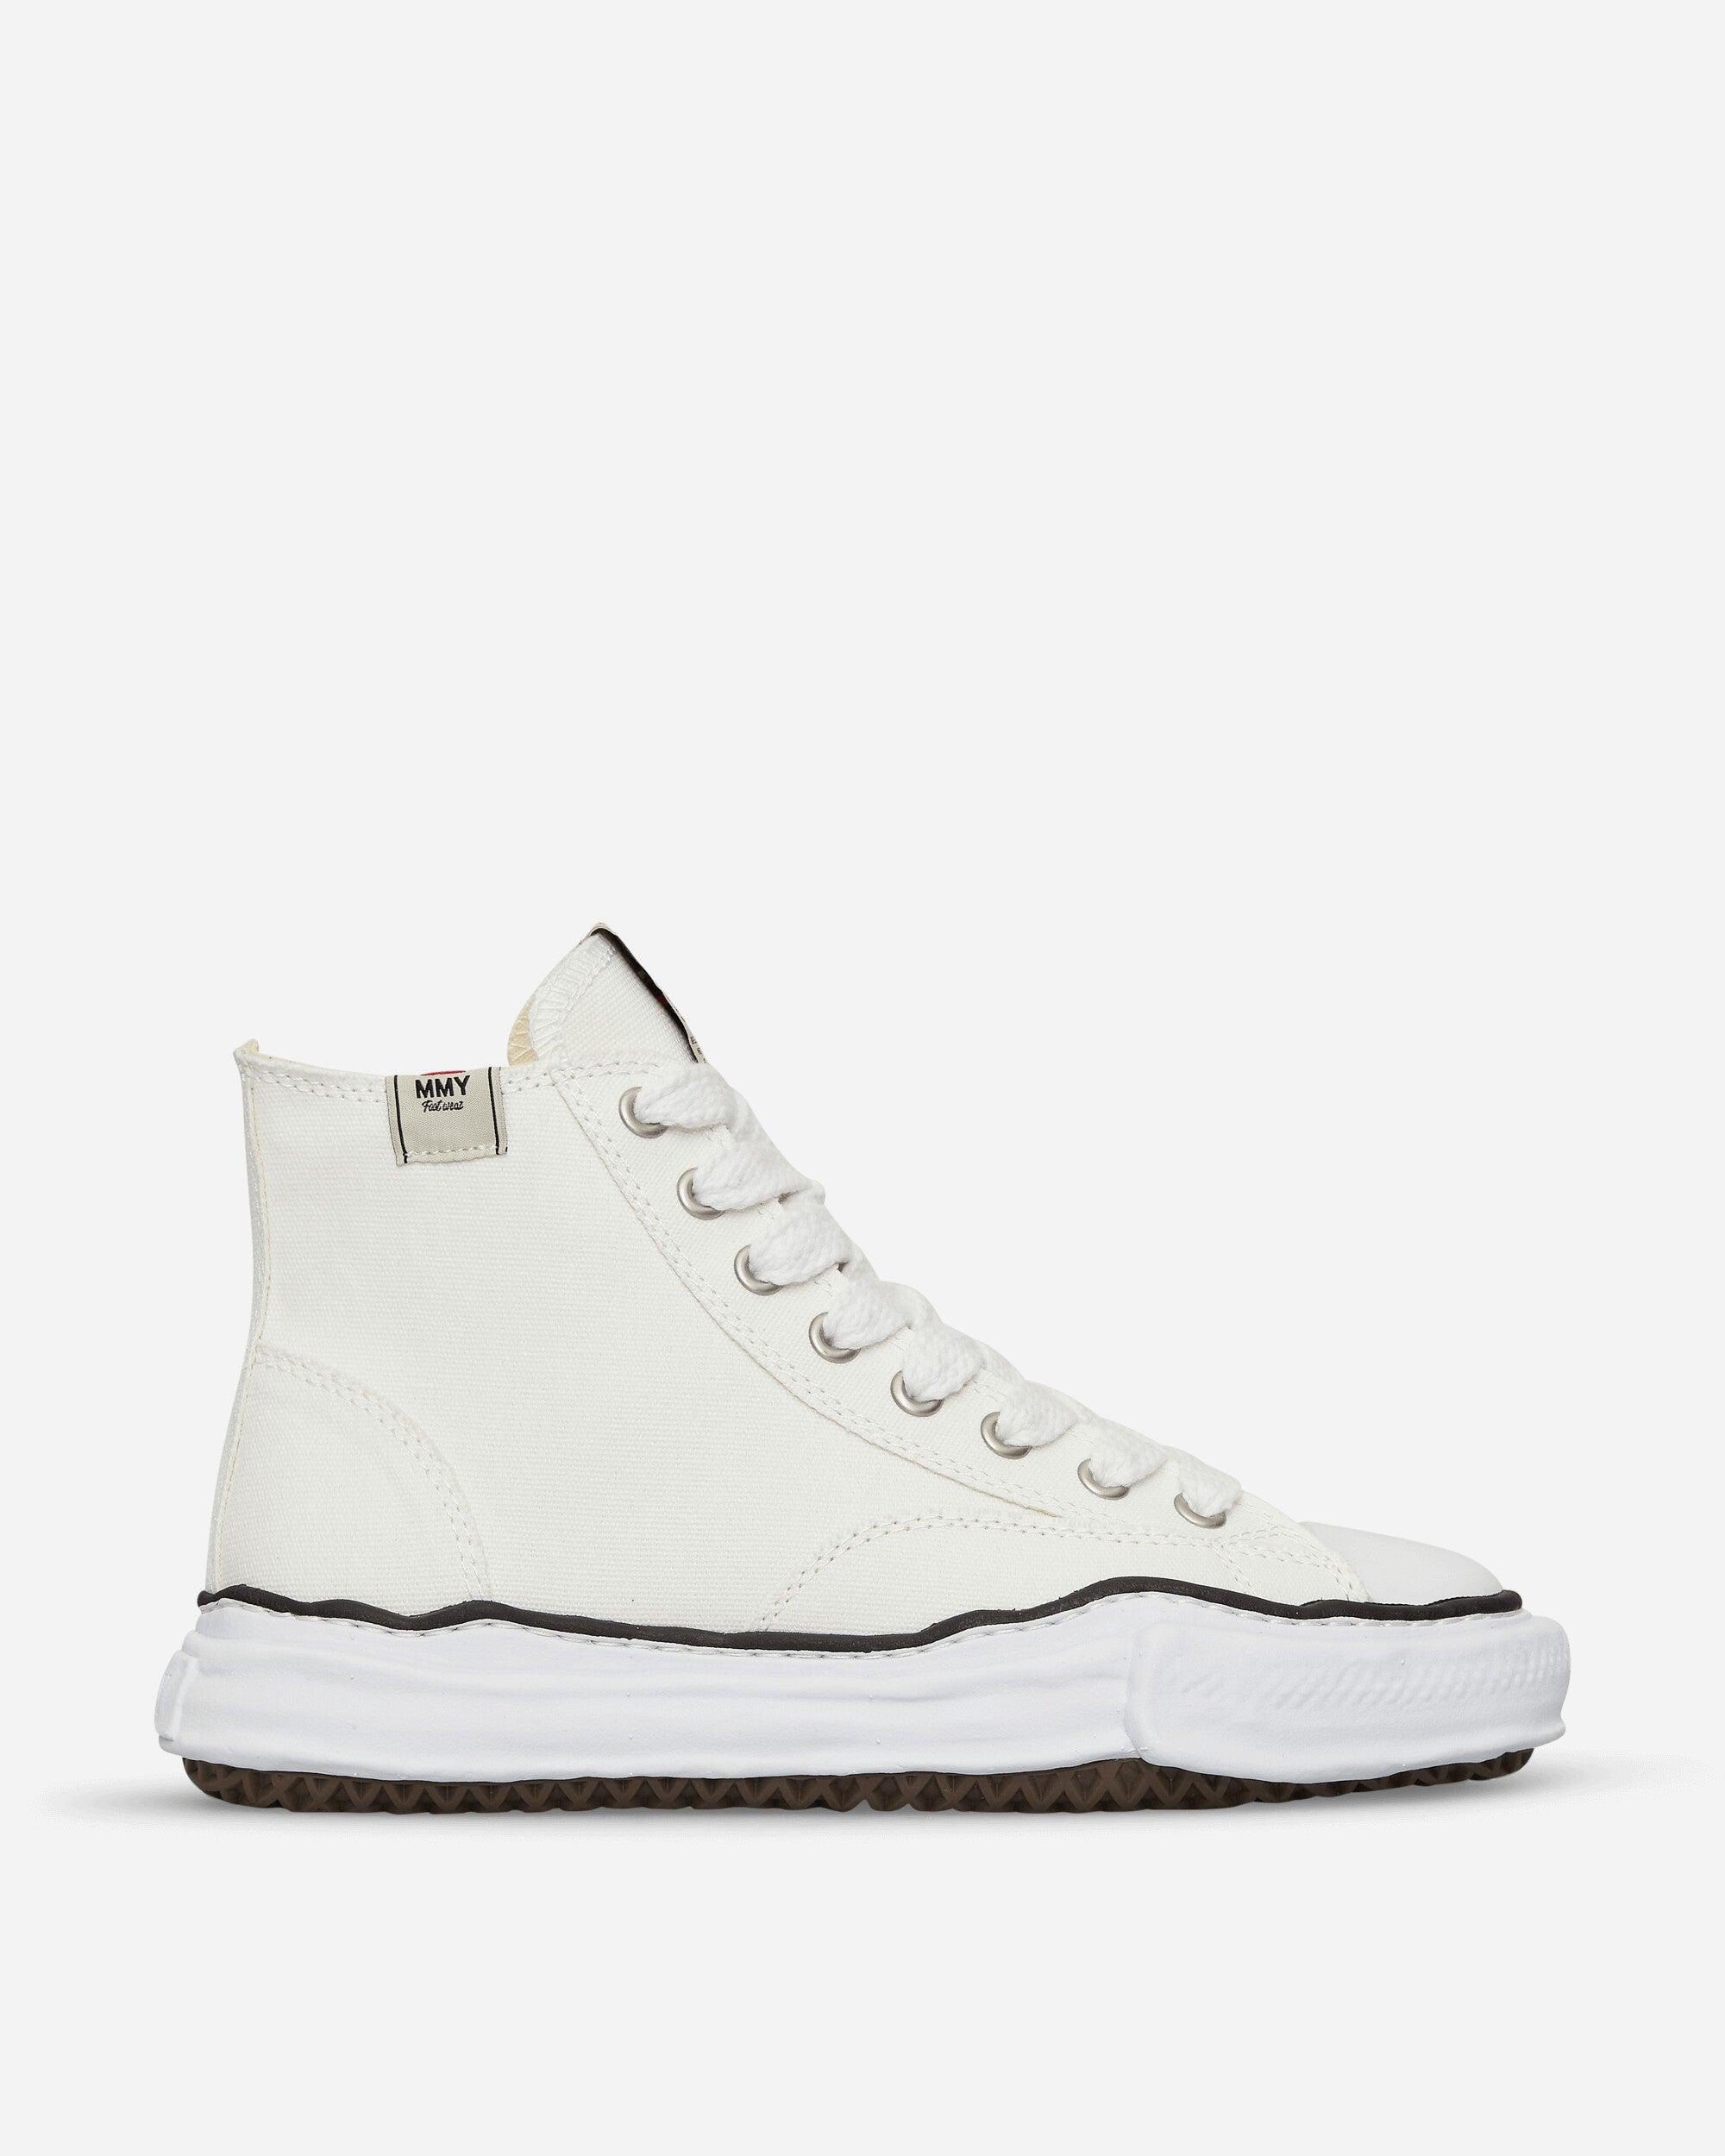 Maison Mihara Yasuhiro Peterson Og Sole Canvas High Sneakers in White ...